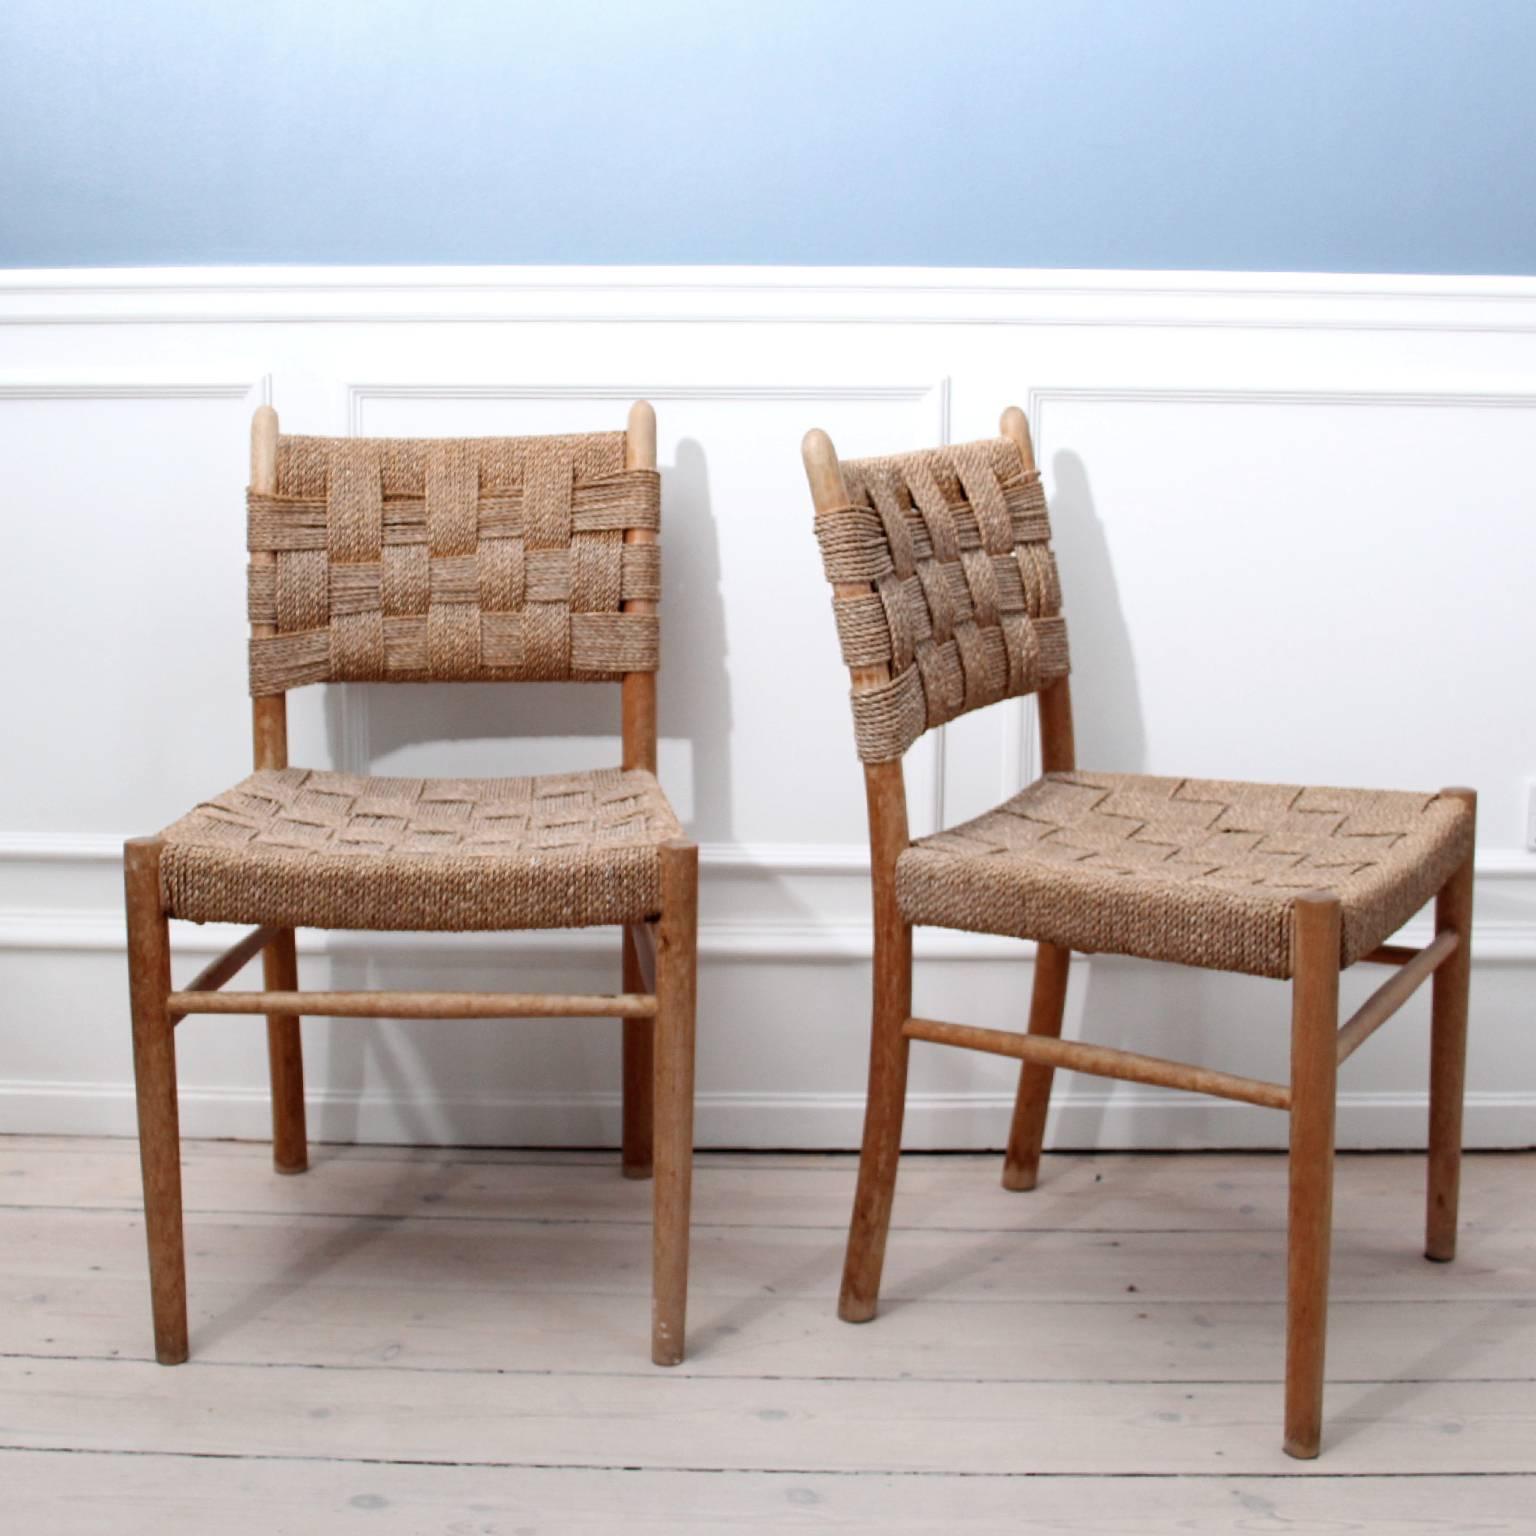 A pair of side chairs, model no 1461, designed by Frits Schlegel in 1935.

Frits Schlegel was a Functionalist Danish architect active during the transition from traditional craftsmanship to industrialized construction methods in the building